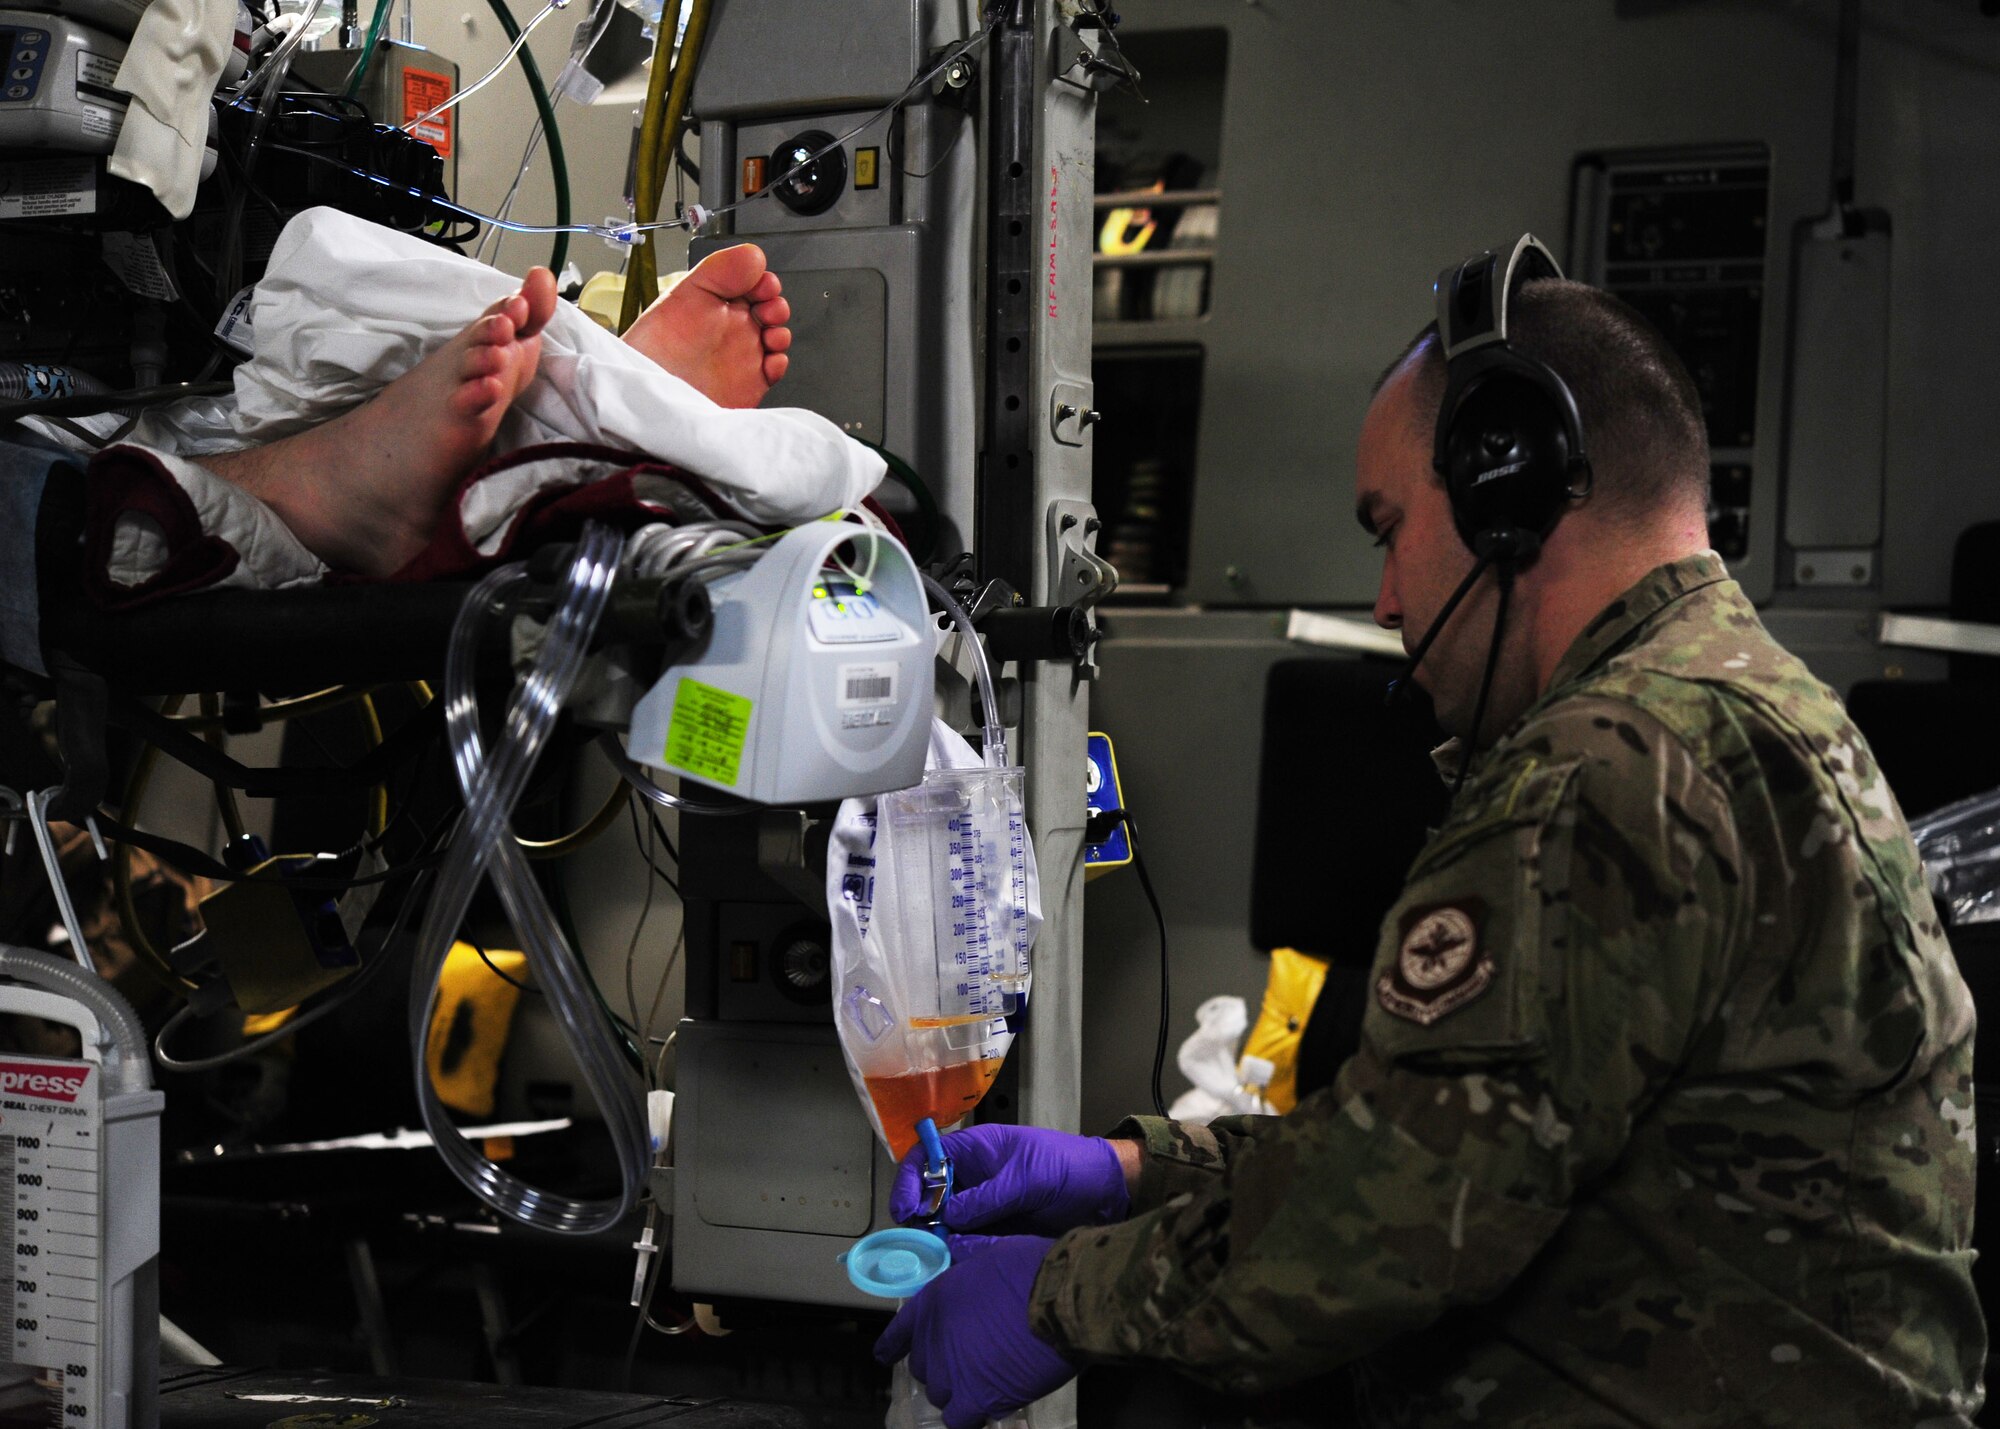 Maj. Shane Runyon tends to a critical care patient on an aeromedical evacuation mission from Bagram Air Base, Afghanistan, Dec. 16, 2013. Runyon is a critical care nurse deployed to the 10th Expeditionary Aeromedical Evacuation Flight Ramstein Air Base, Germany. (U.S. Air Force photo/Airman 1st Class Aaron Stout)